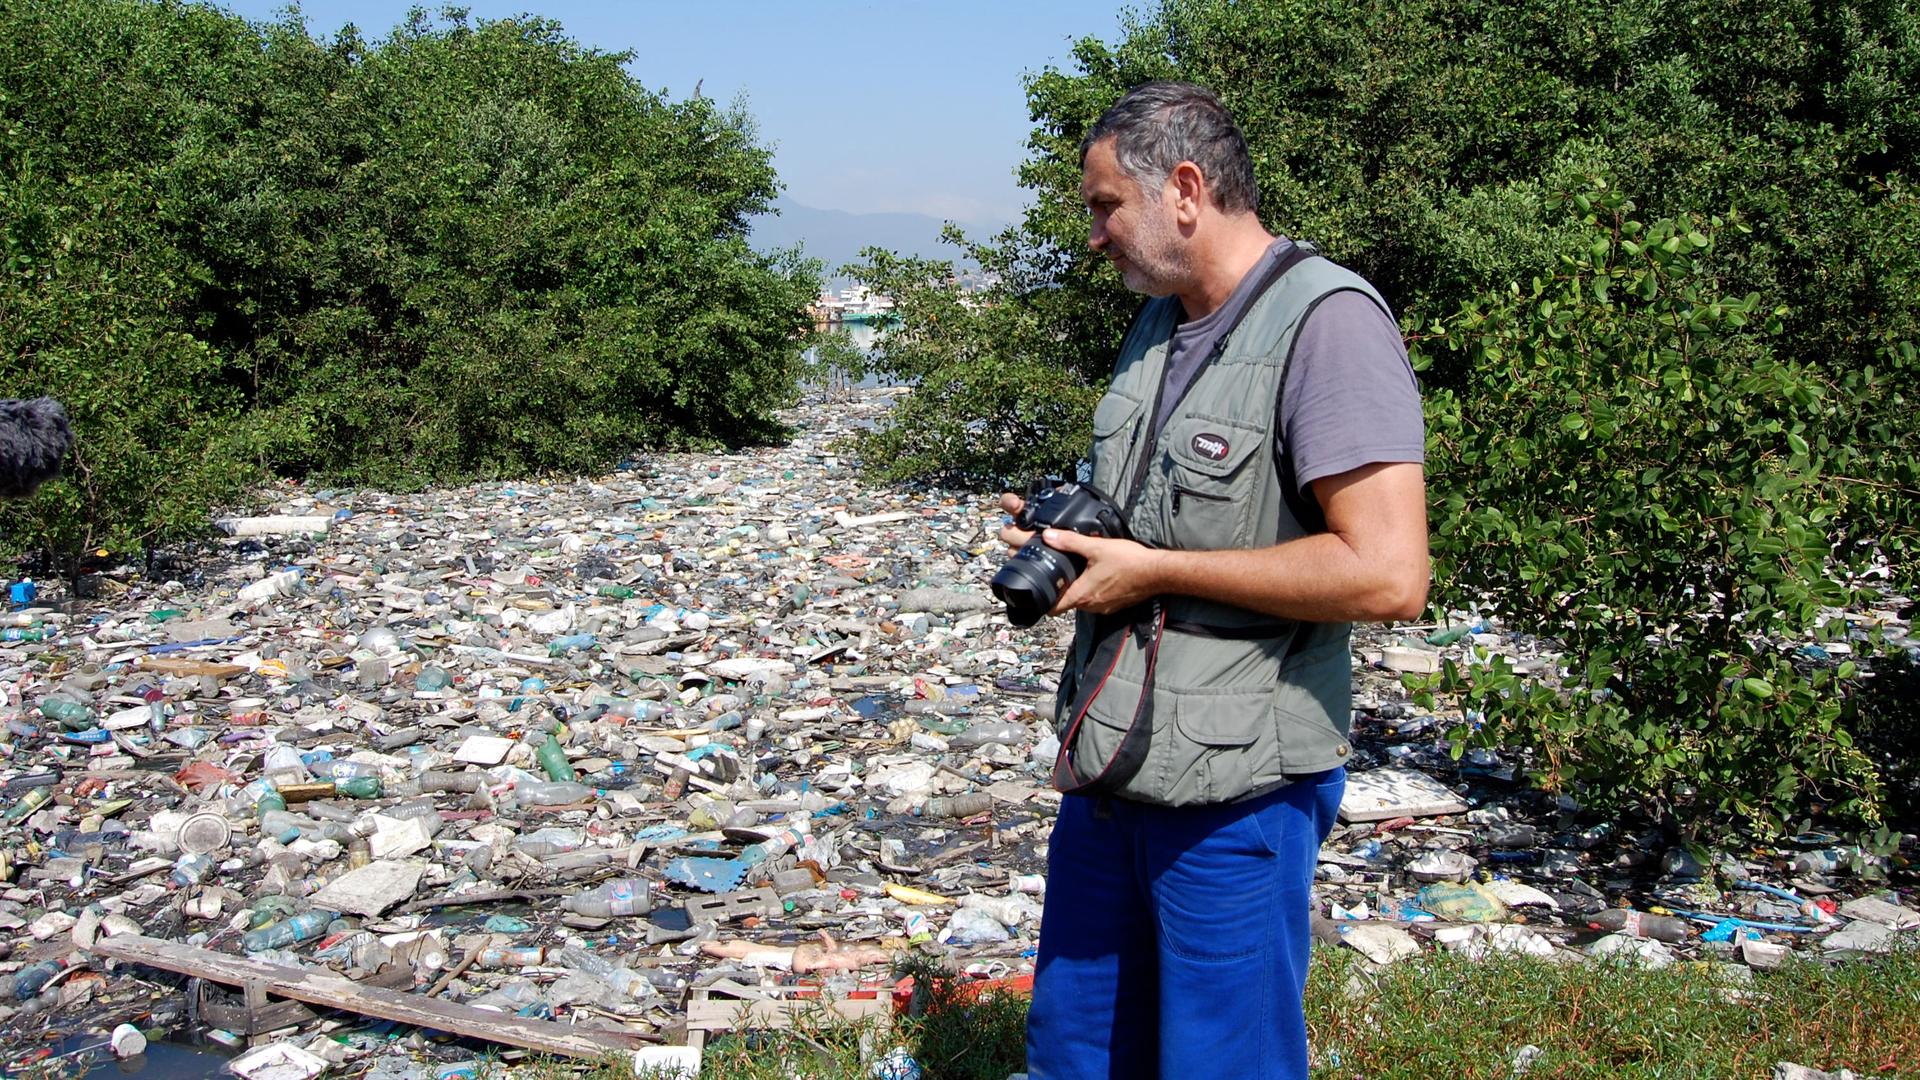 Biologist Mario Moscatelli along the shores of Guanabara Bay in Rio